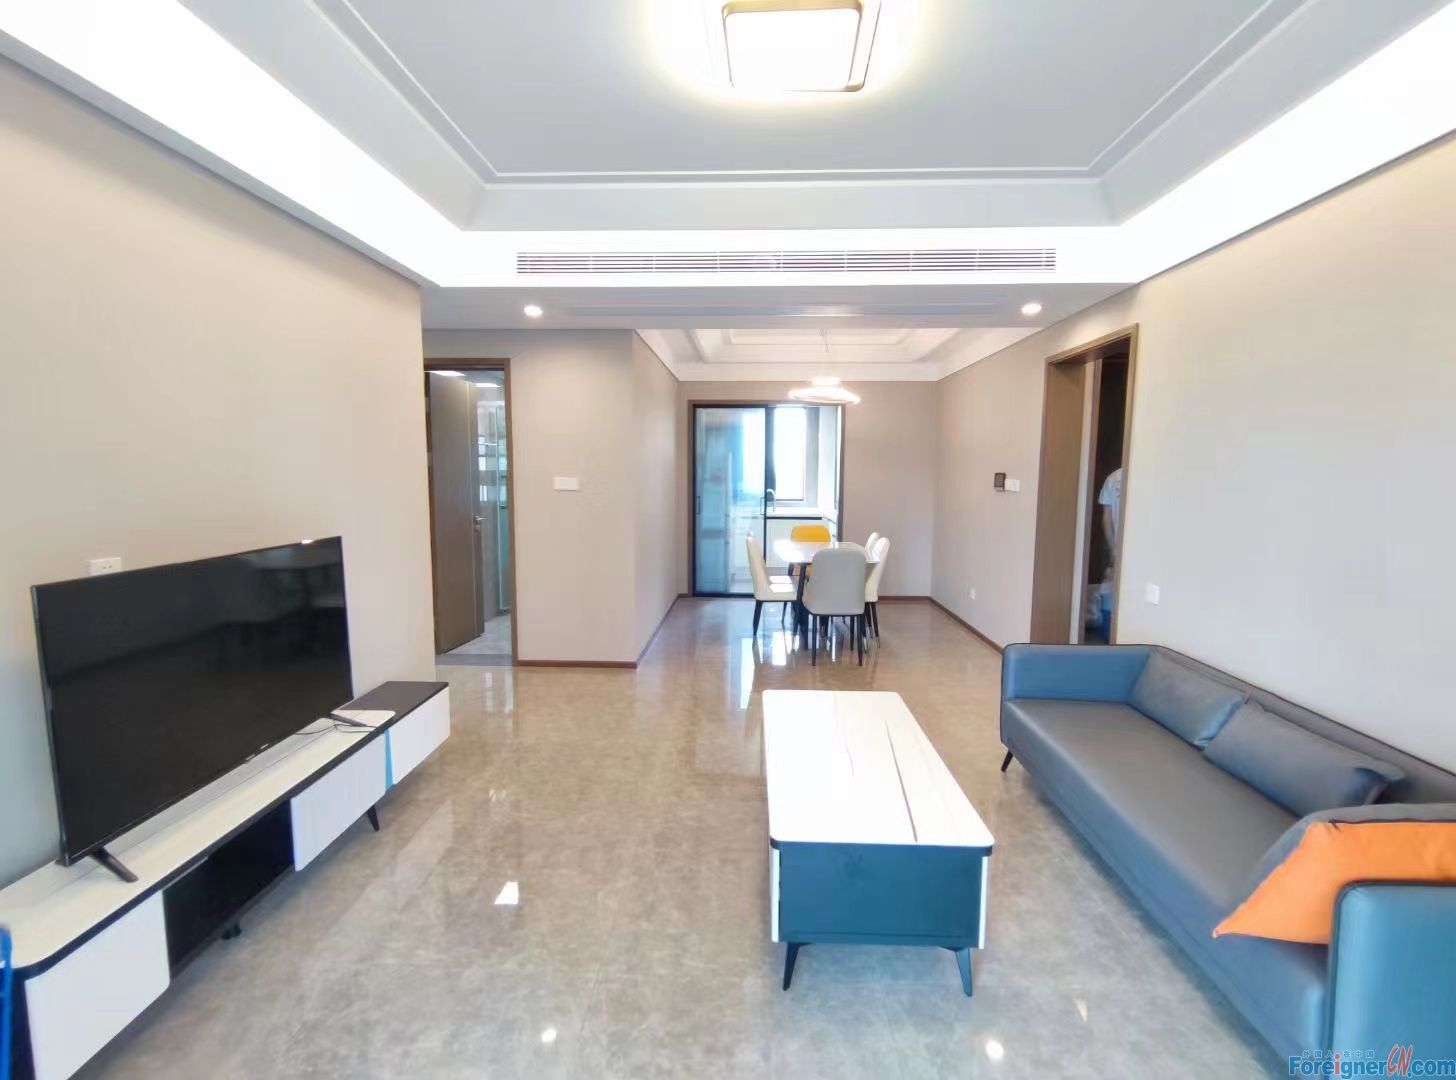 Wonderful !! Bravura apartment in SIP to rent /4 bedrooms and 2 bathrooms/brand new /Xie tang street nearby/Ao ti Shopping Center nearby/Suzhou ,China/